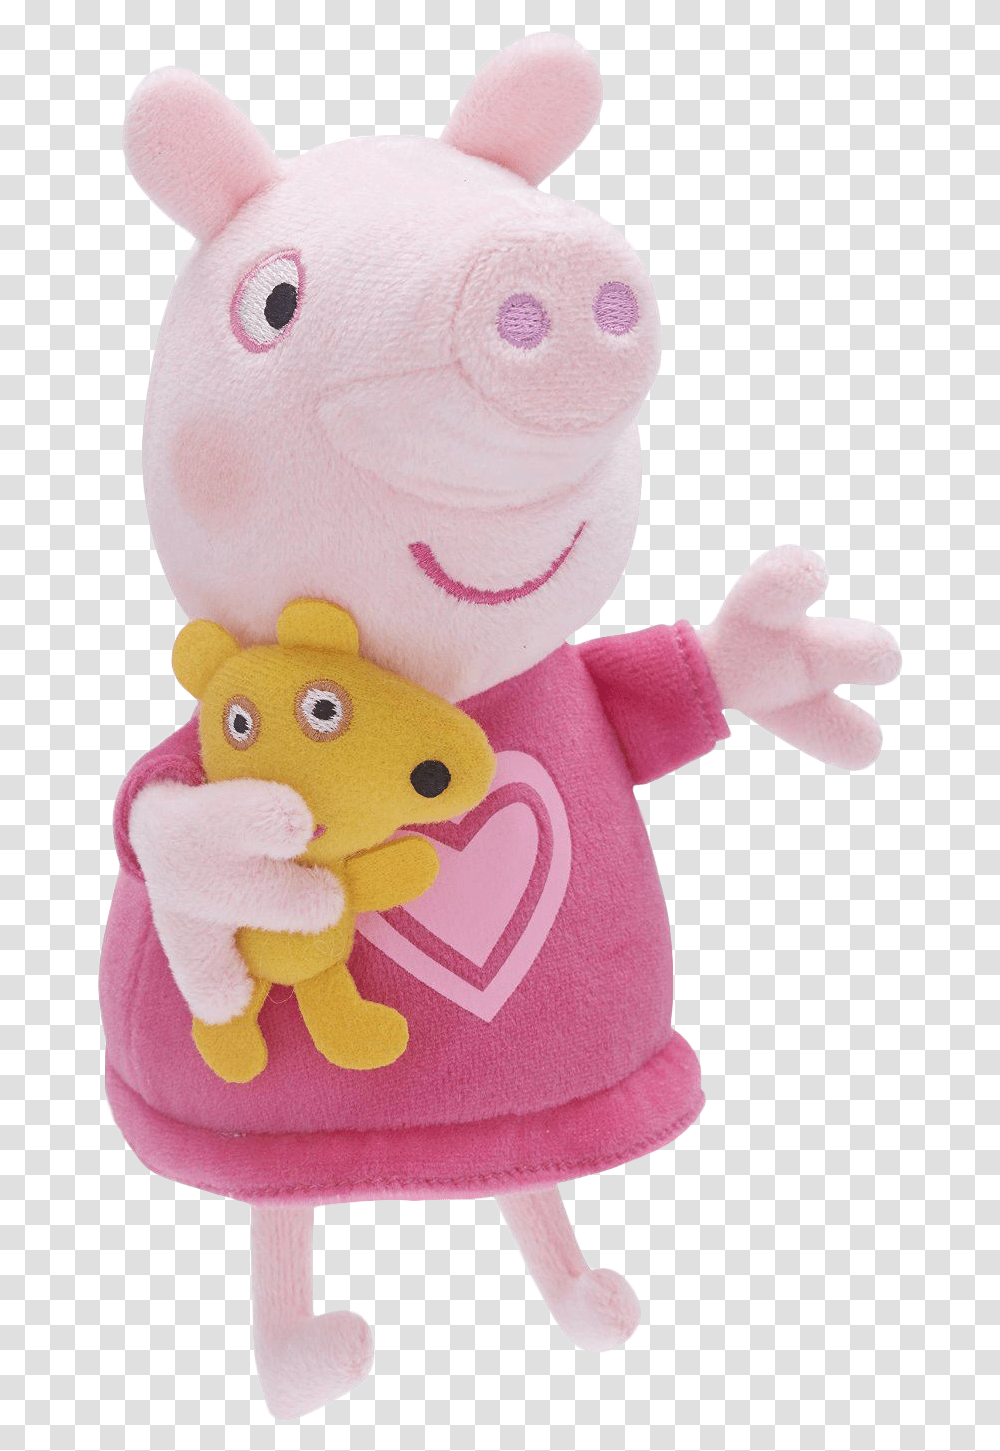 Peppa Pig Peppa Pig Bedtime Teddy, Toy, Doll, Plush, Figurine Transparent Png